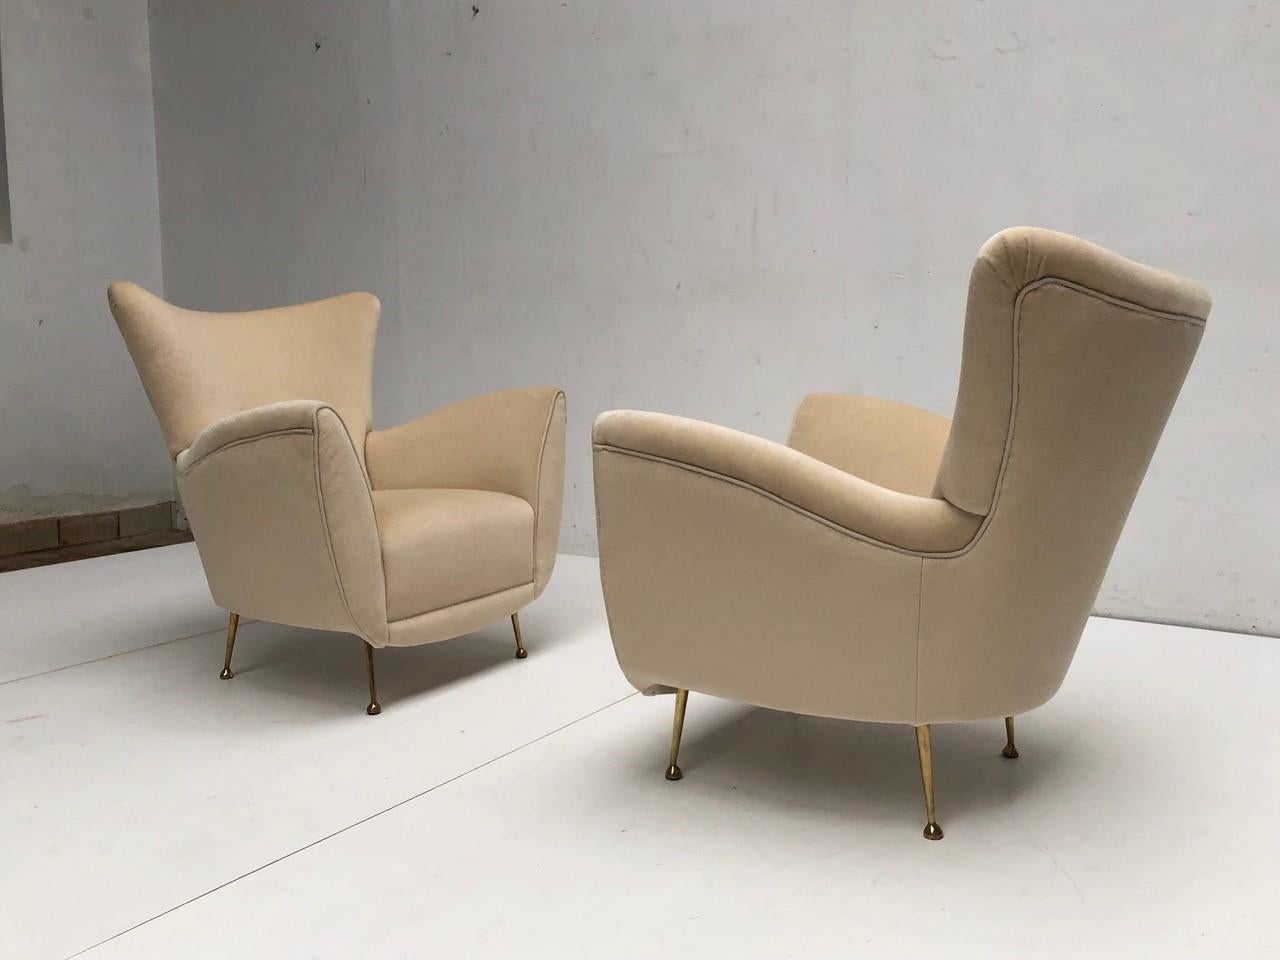 Cast Sculptural Form Lounge Chairs, Mohair Fabric with Brass Legs, ISA, Italy, 1950 For Sale